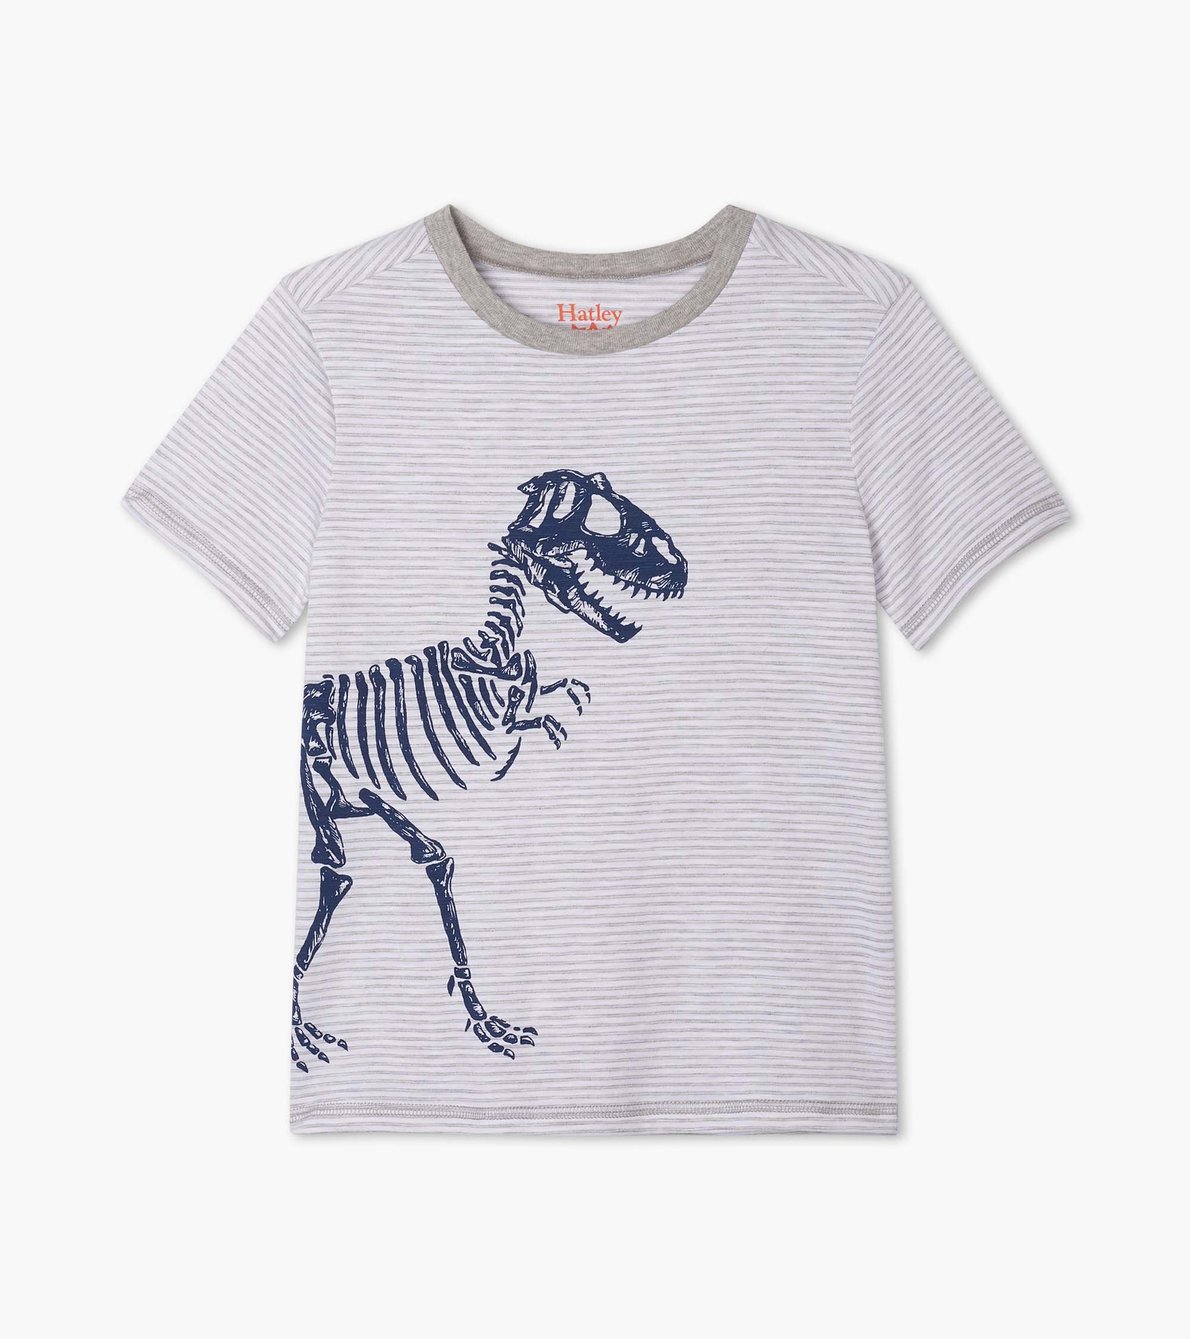 View larger image of T-Rex Graphic Tee